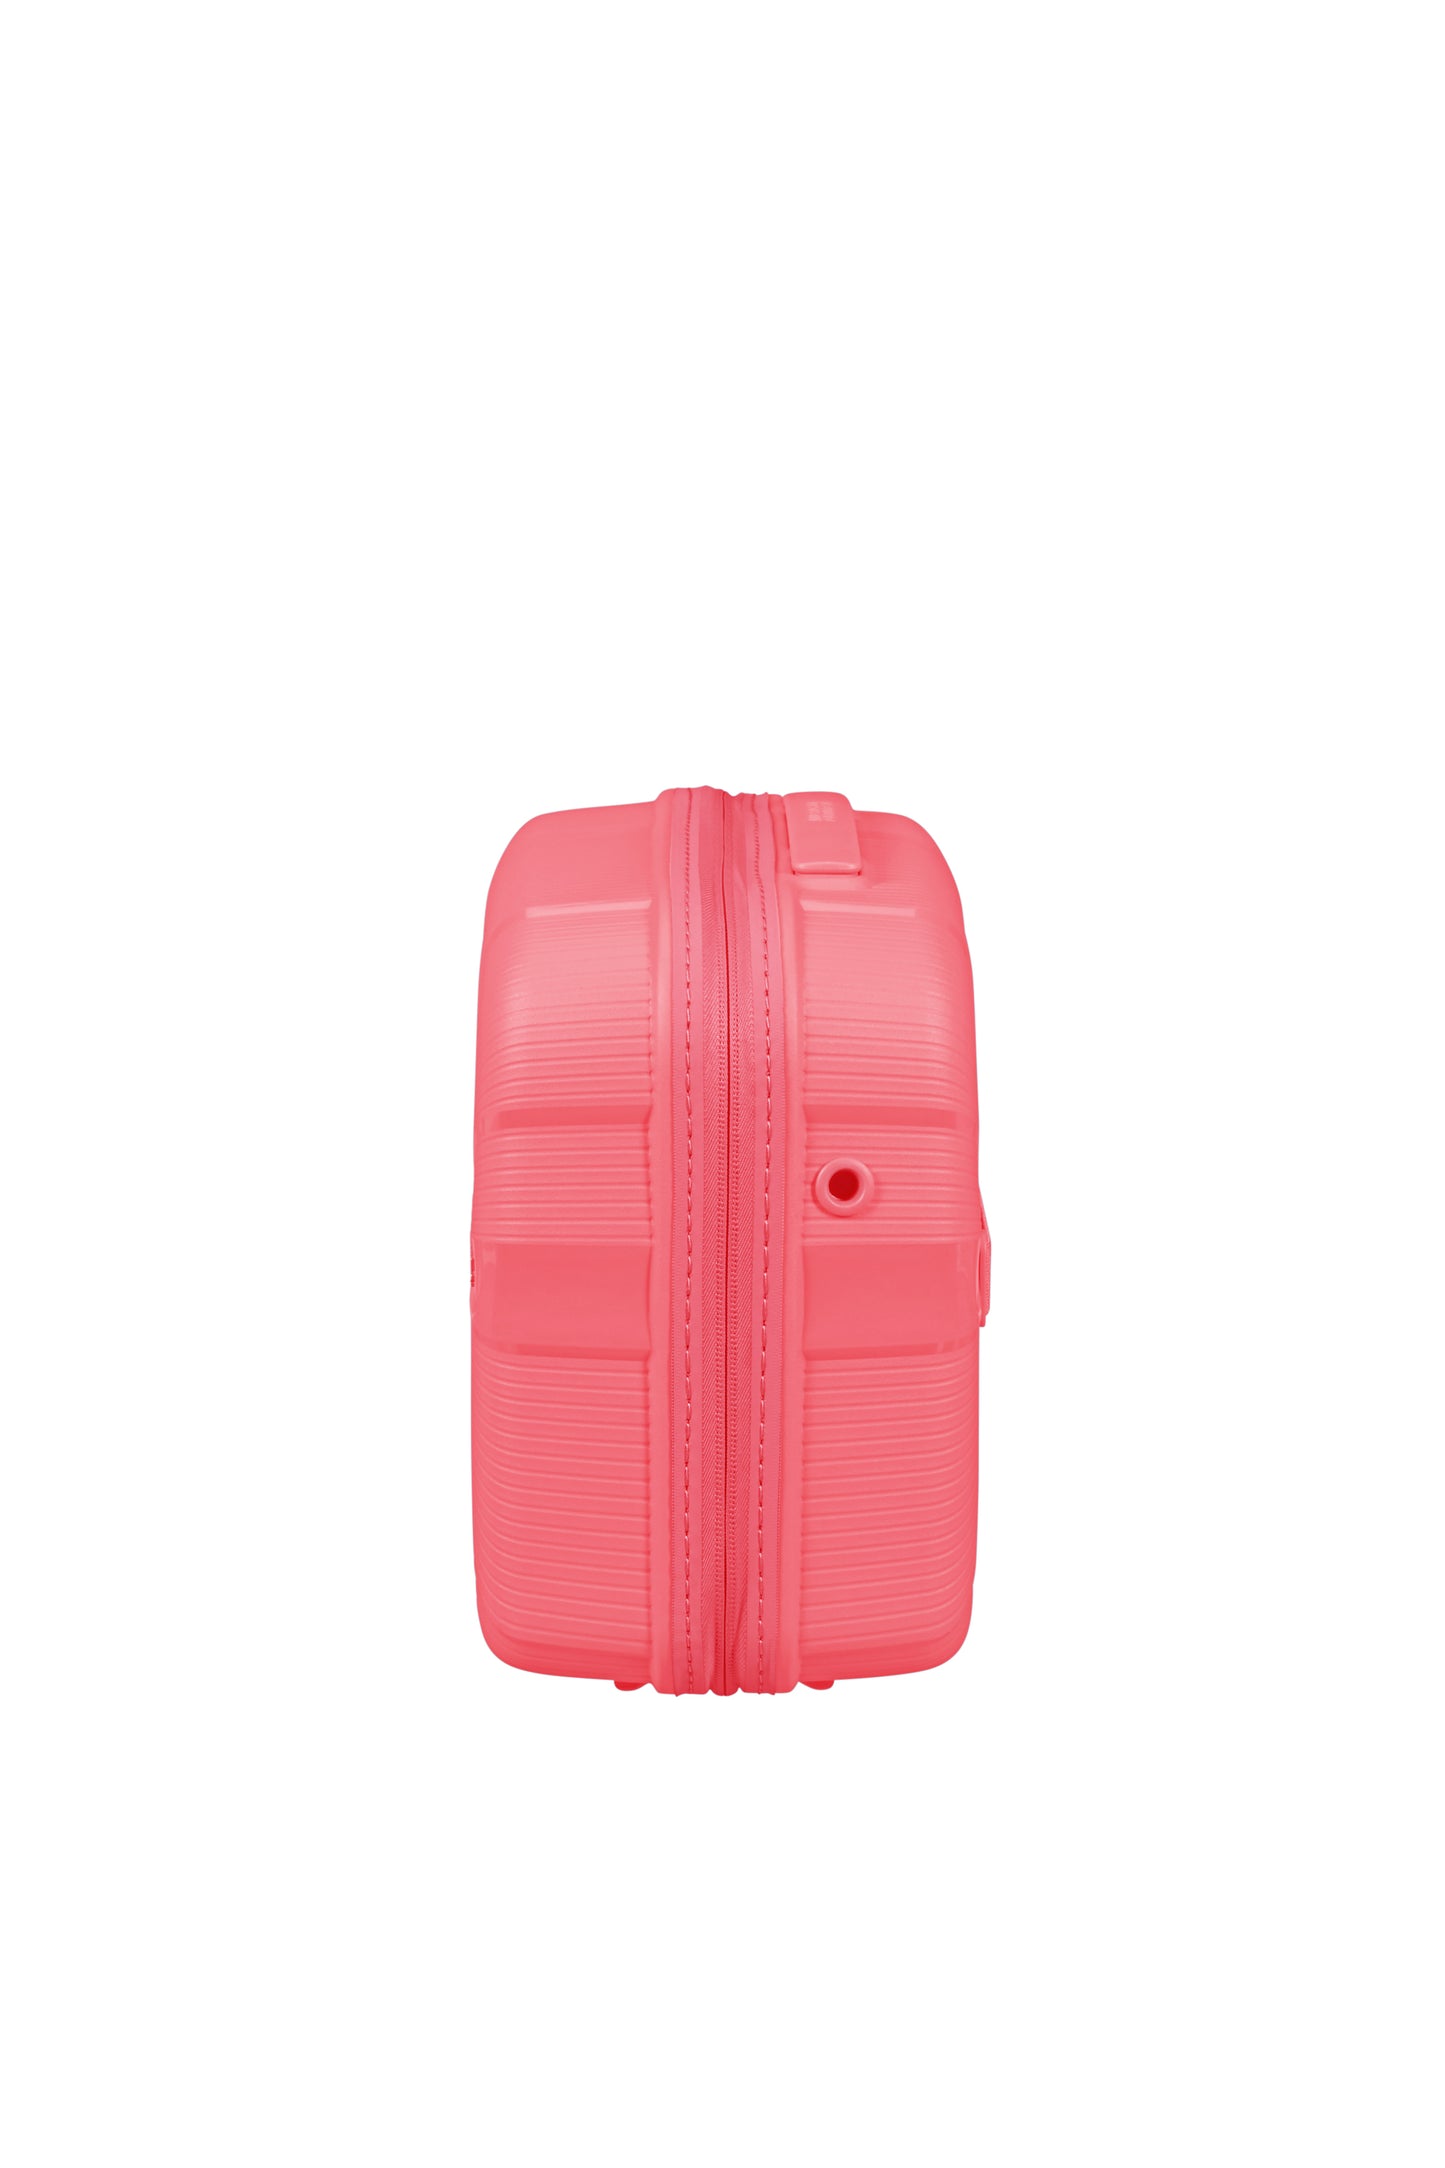 American Tourister STARVIBE  beauty case  Sun kissed Coral